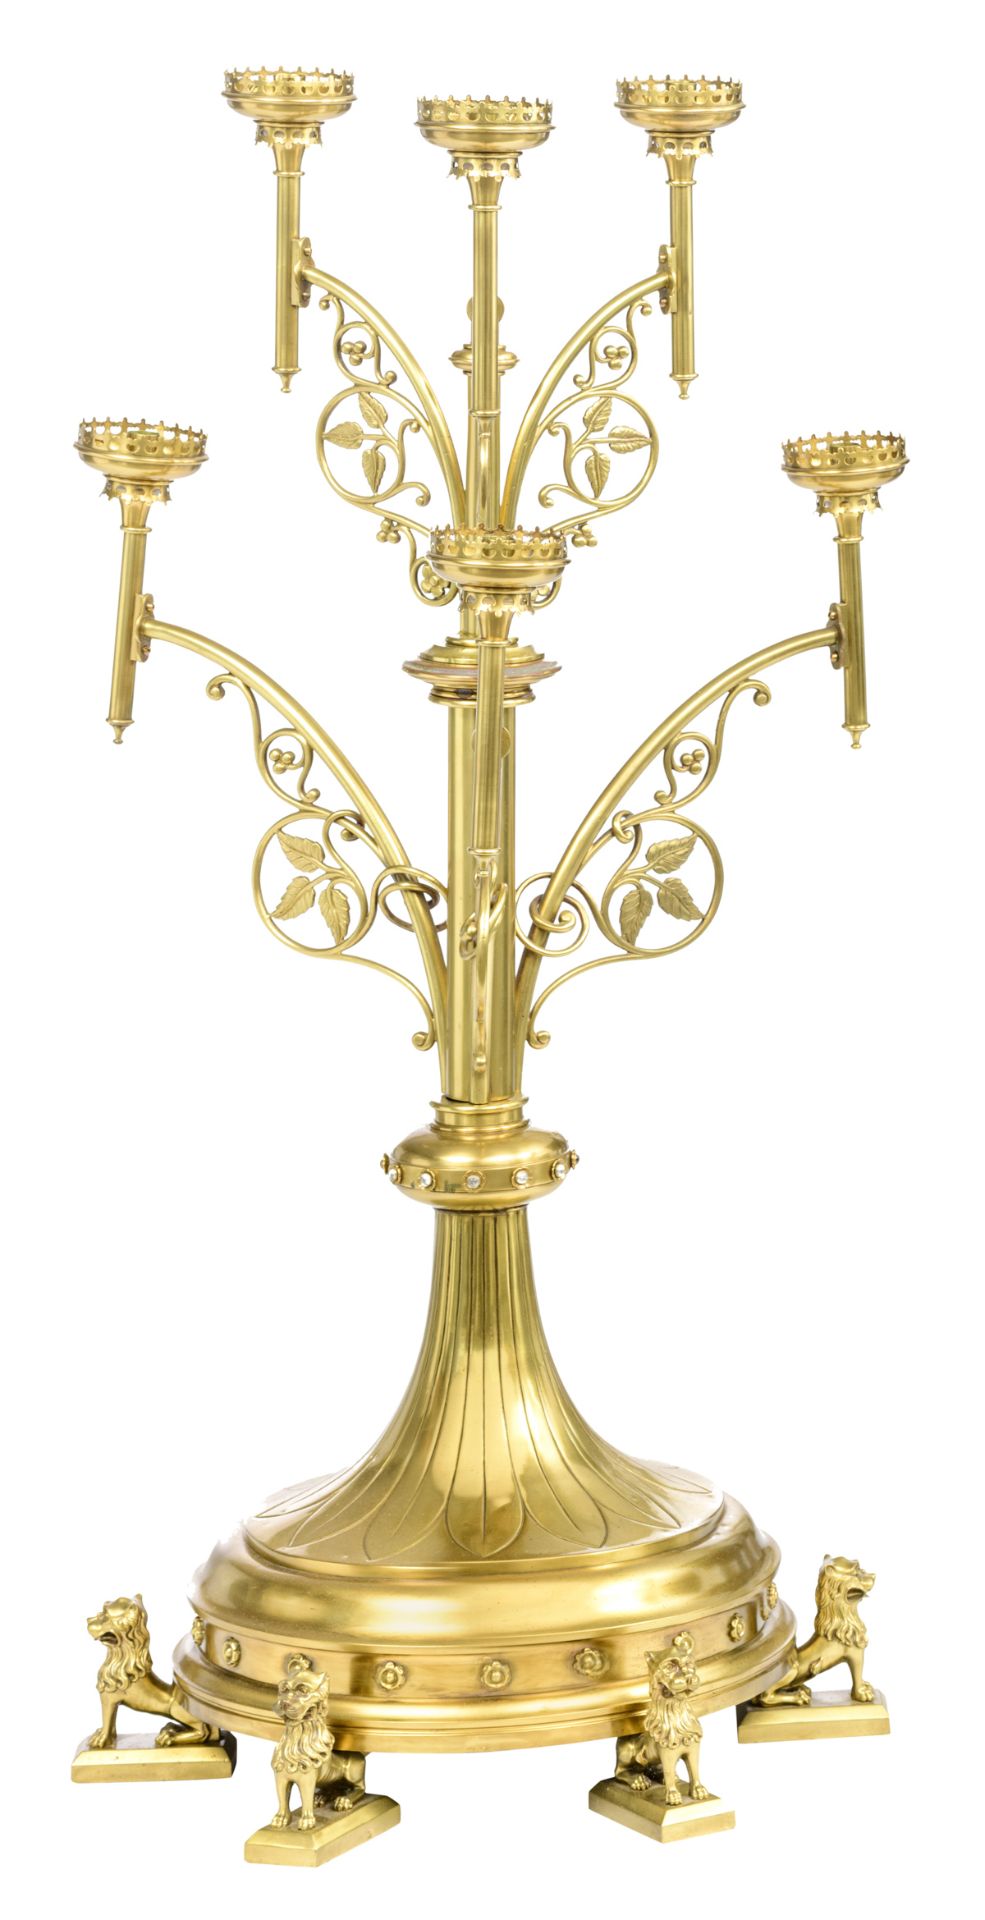 An imposing bronze Gothic Revival floor candelabra on lion-shaped feet, the six arms decorated with